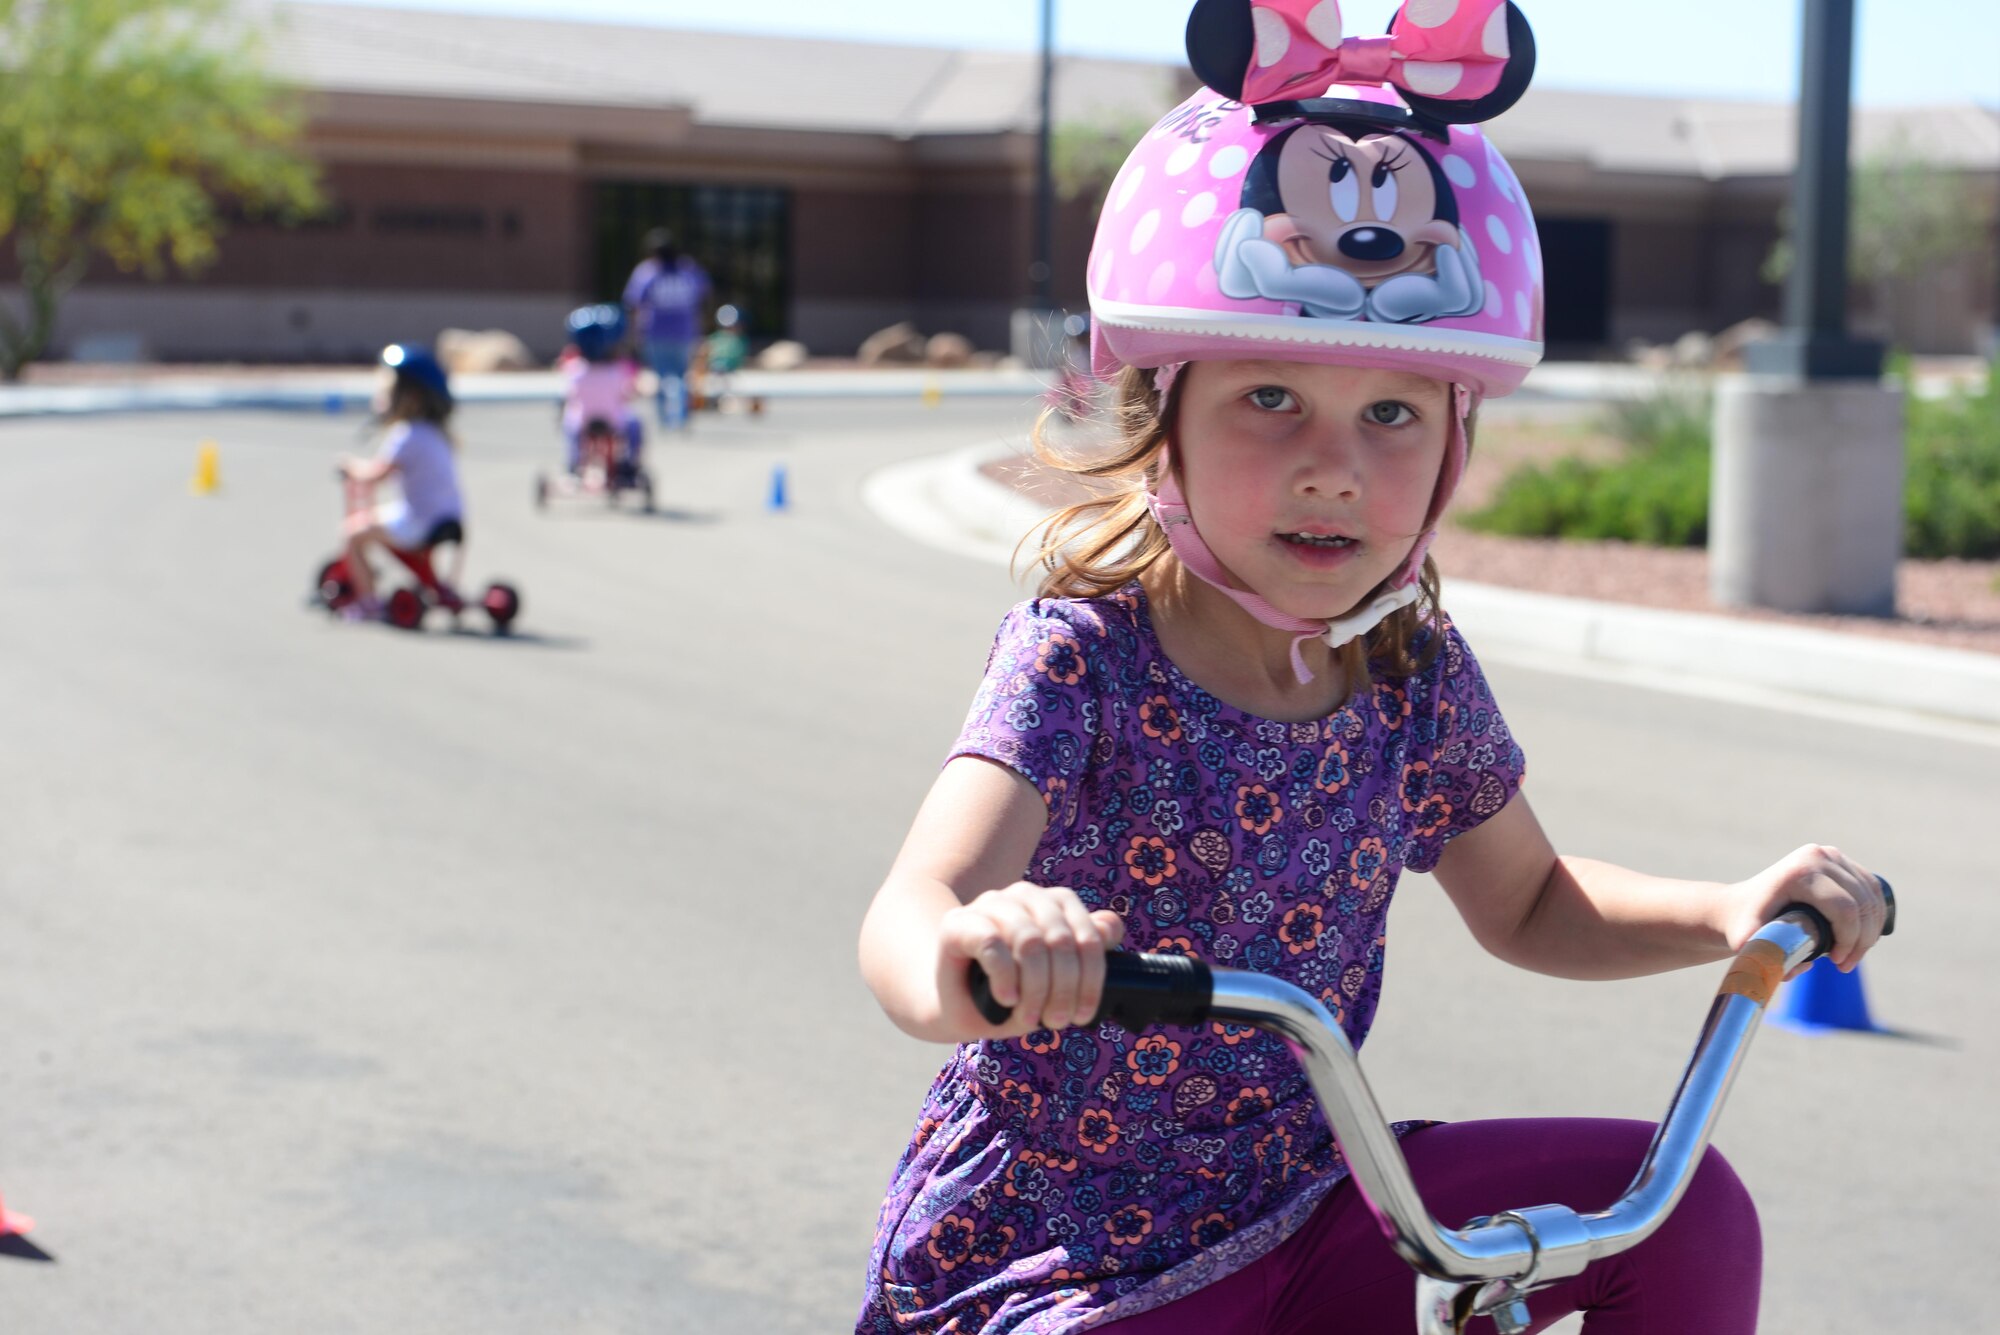 A child rides a tricycle during the trike-a-thon at the Nellis Child Development Center on Nellis Air Force Base, Nev., April 14, 2017. April is designated as the Month of the Military Child and is a way to celebrate the unique aspects of being a military child that most other children outside the military will never have to face. (U.S. Air Force photo by Airman 1st Class Nathan Byrnes/Released)

